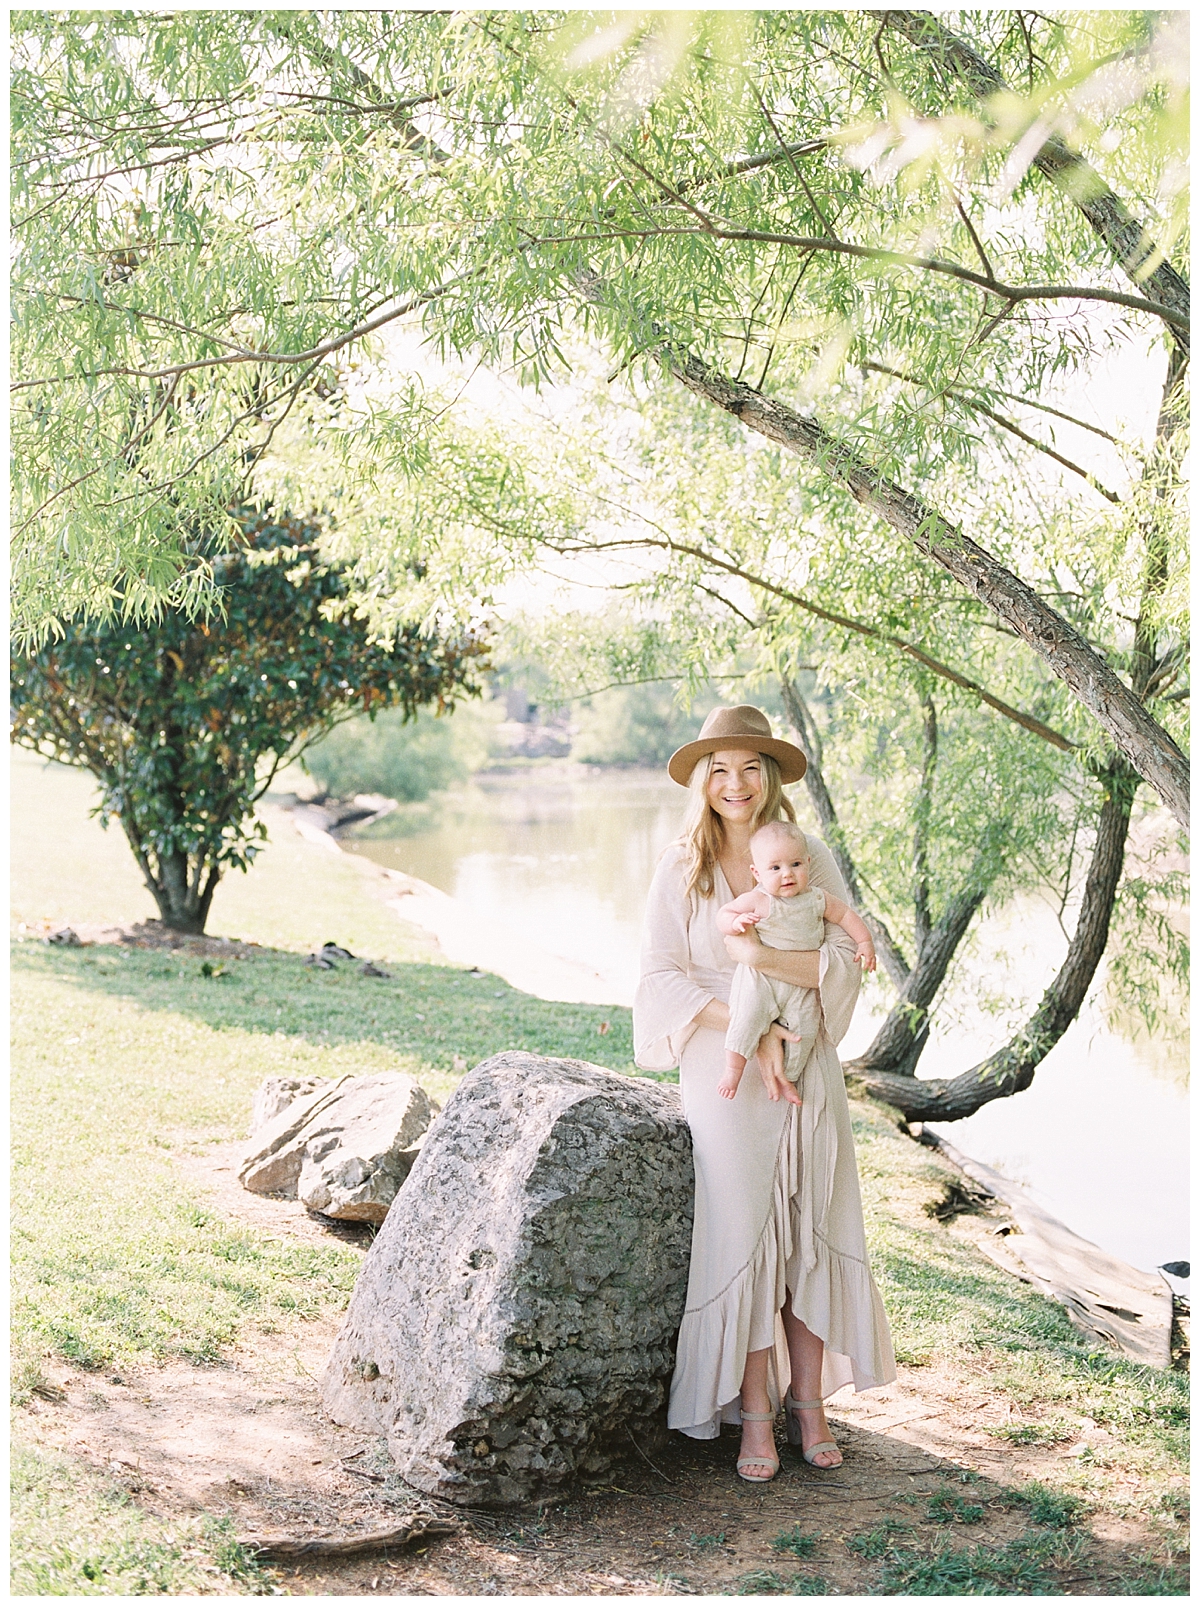 Outdoor mother and daughter park photo shoot by family photographer Grace Paul. 